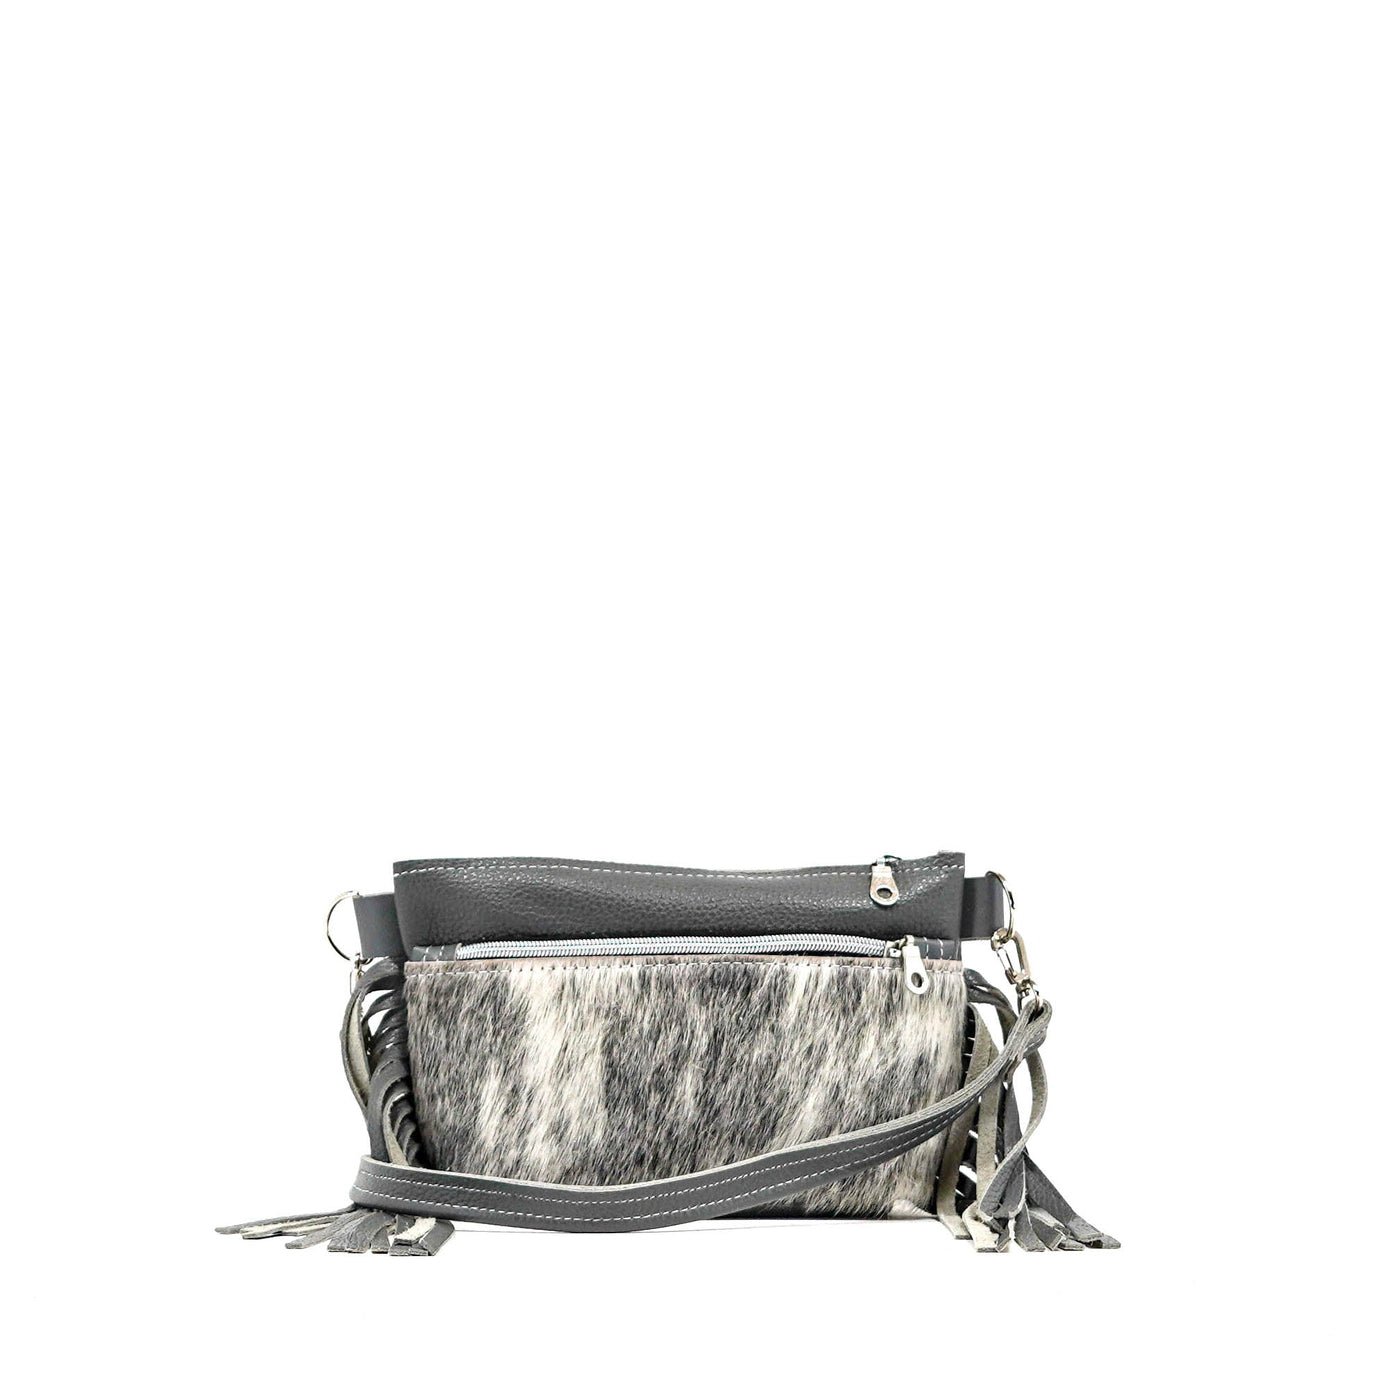 002 Miss Kitty - Grey Brindle w/ Grey Leather-Miss Kitty-Western-Cowhide-Bags-Handmade-Products-Gifts-Dancing Cactus Designs